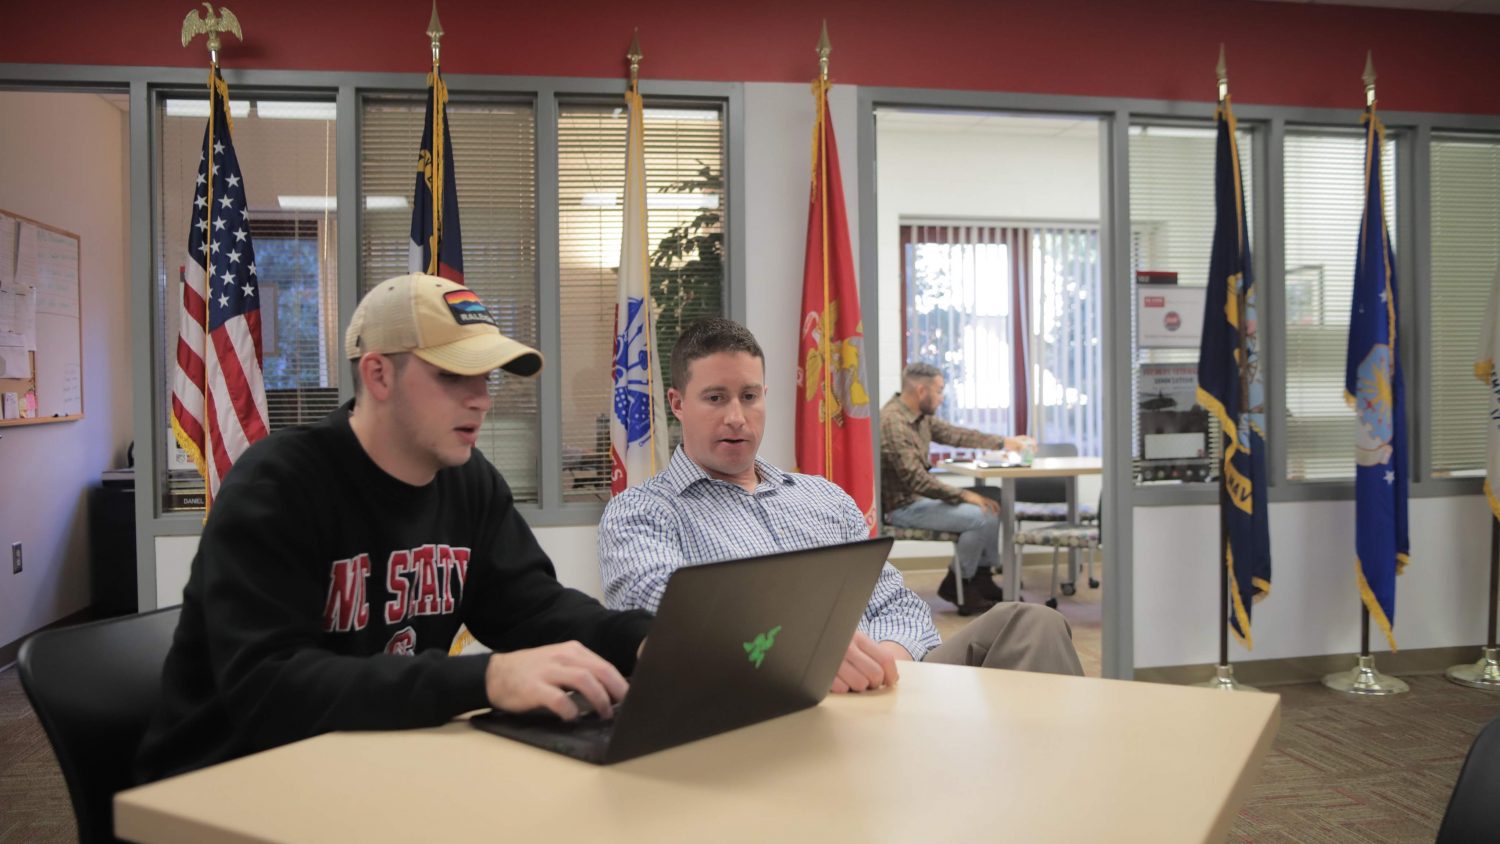 Student Will Beam and Nick Drake meet at the Military and Veteran Services suite